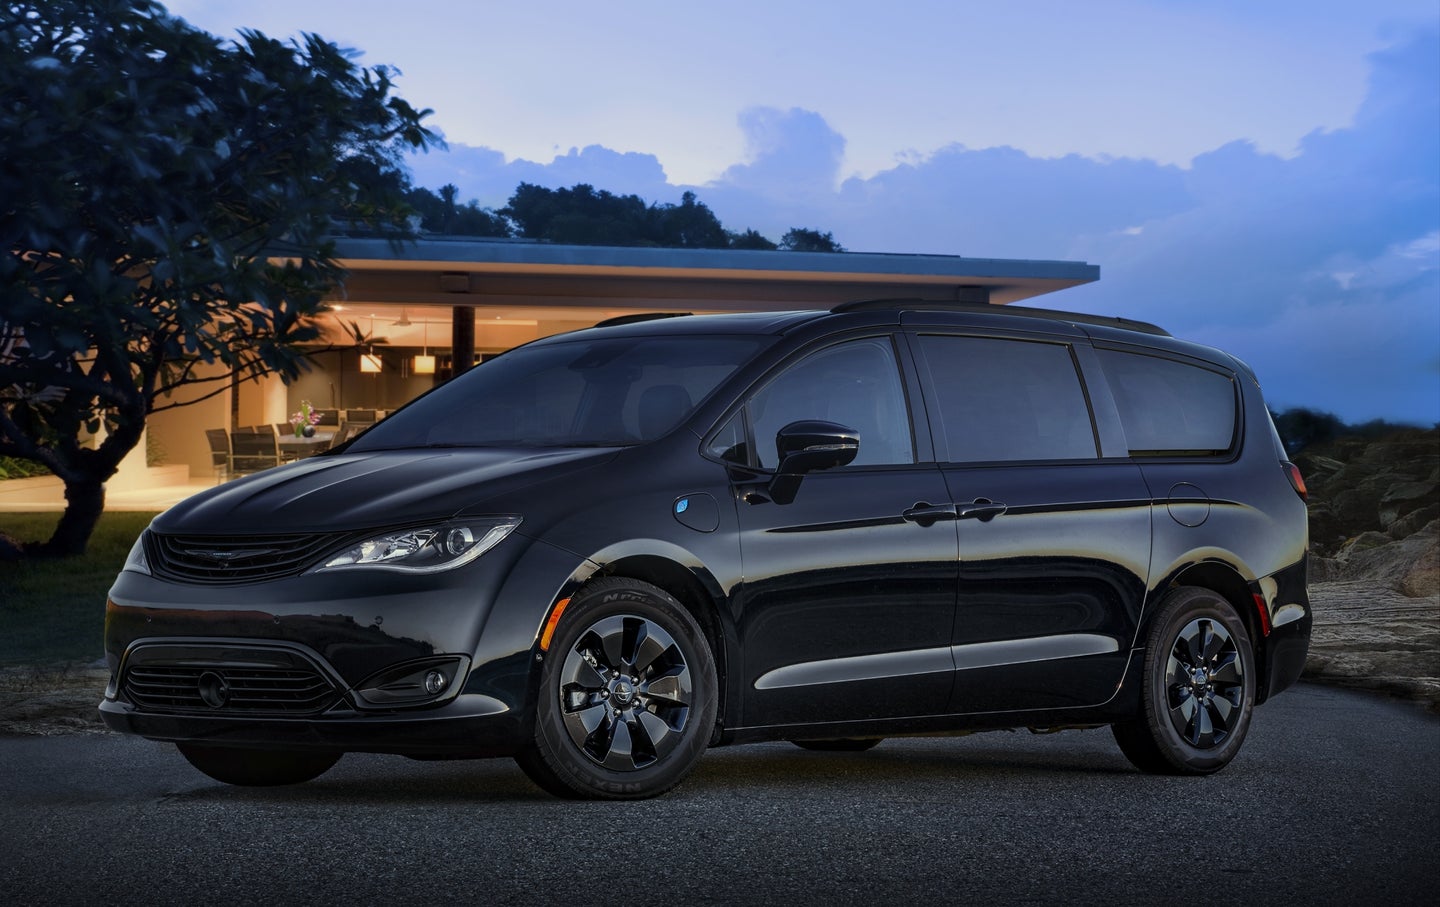 2019 Chrysler Pacifica Hybrid S Appearance Package: When Green Turns Black